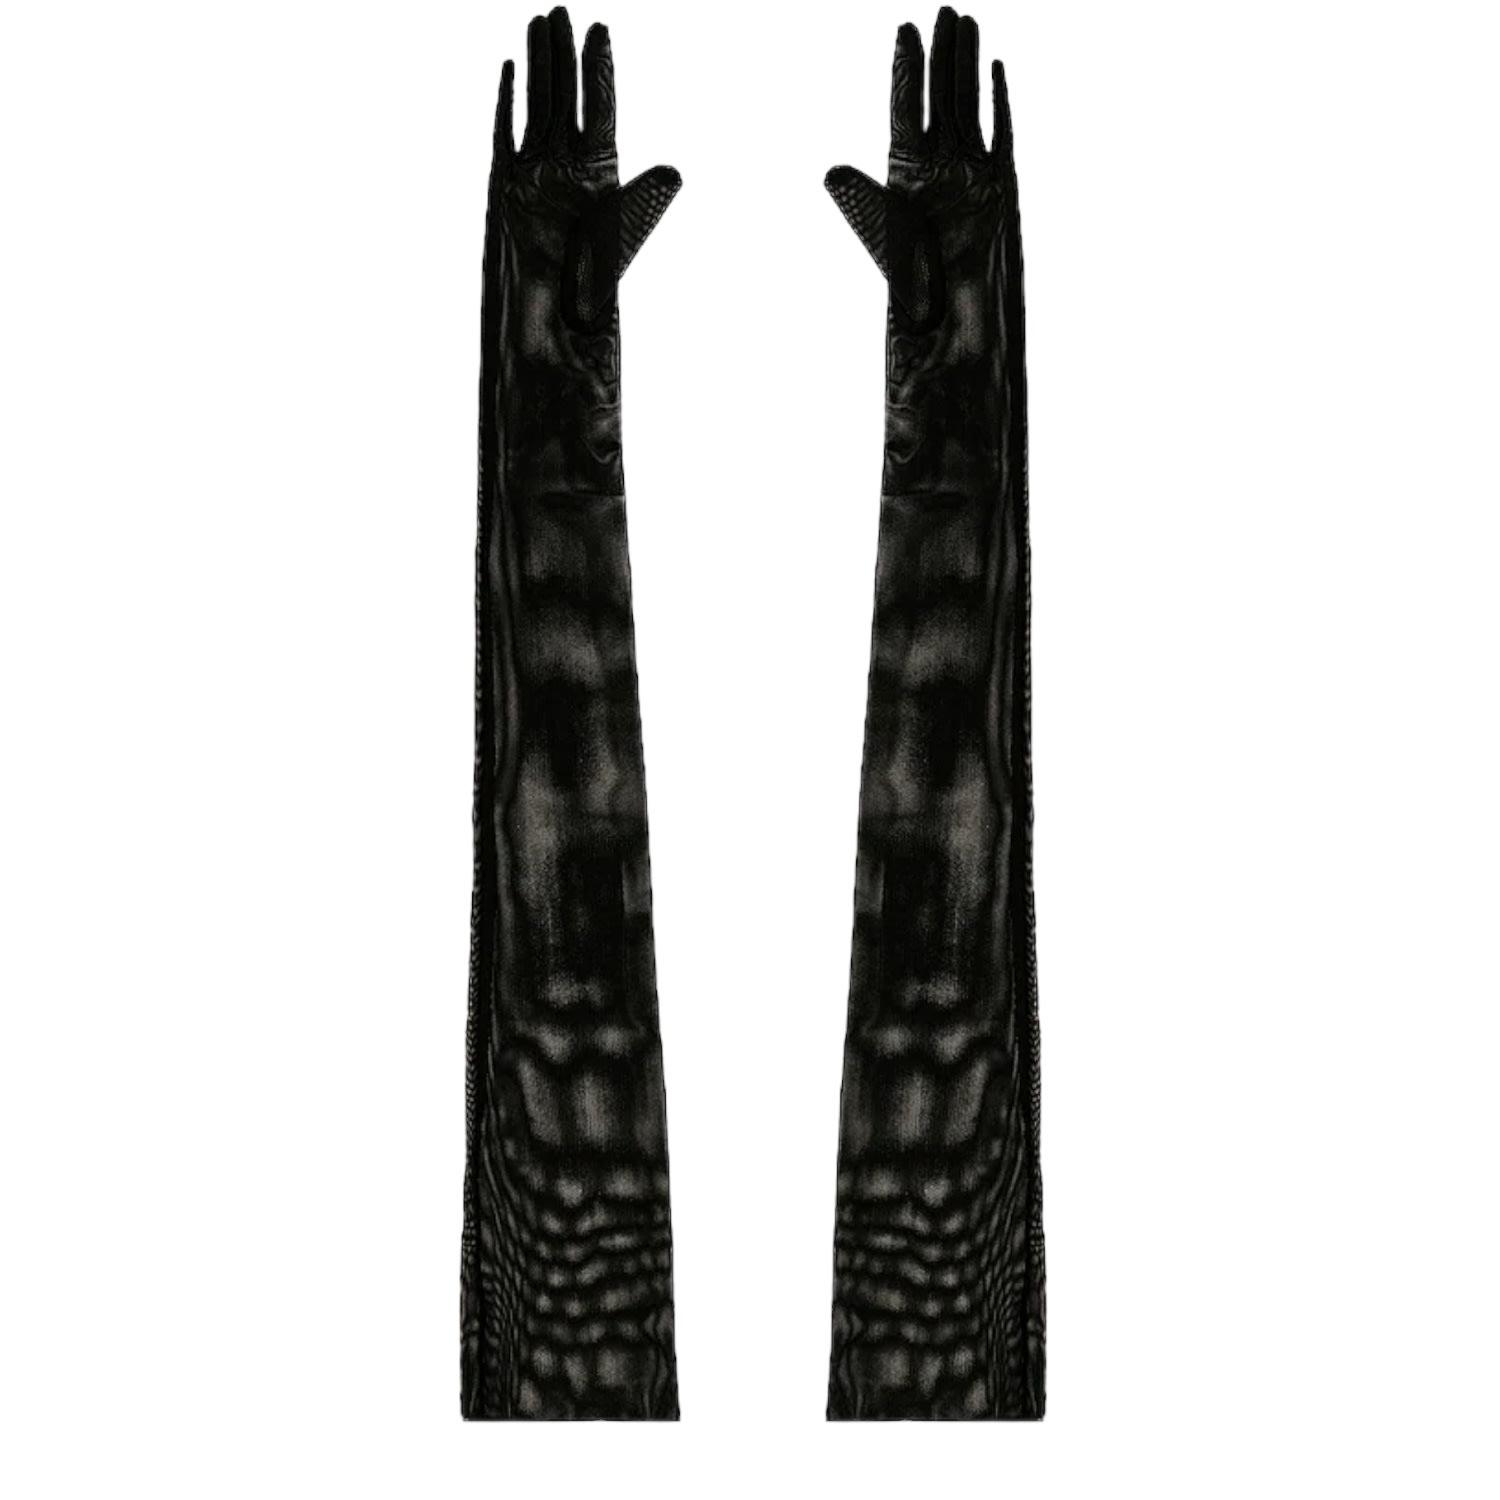 HIGH HEEL JUNGLE by KATHRYN EISMAN The Lily Sheer Opera Glove in Black